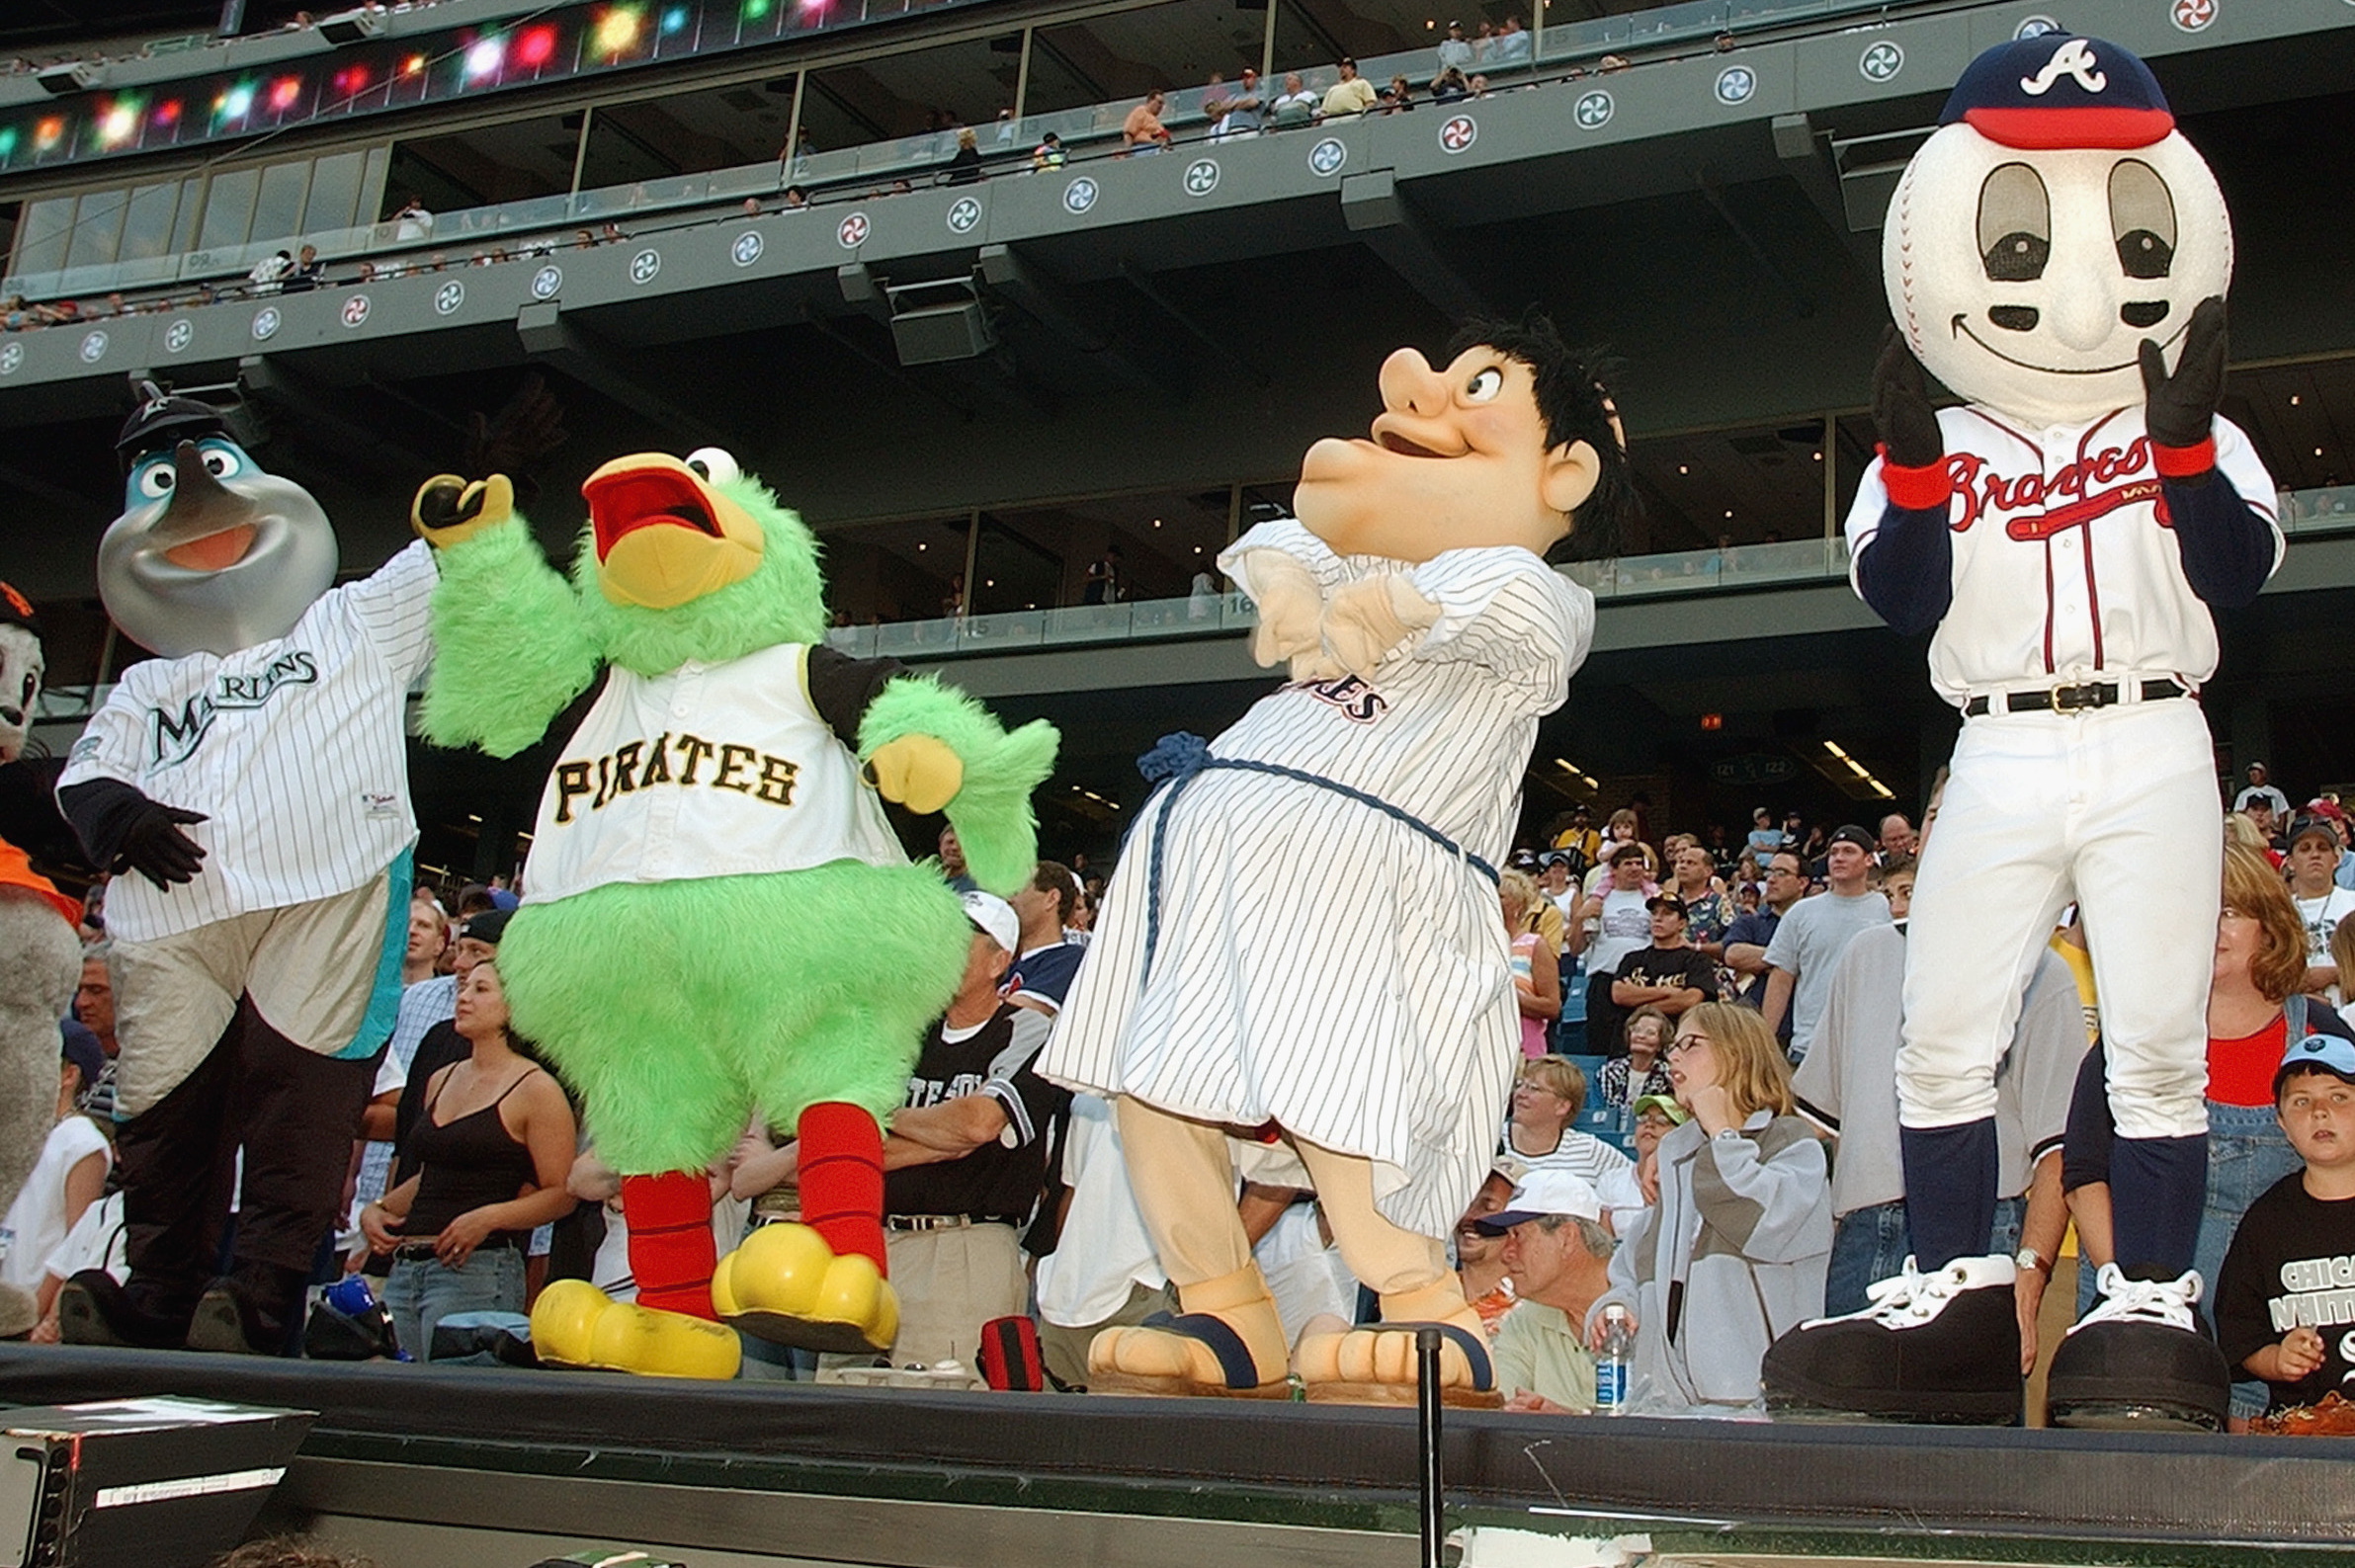 Pirates' Pierogi Race was so close it had to go to replay in the